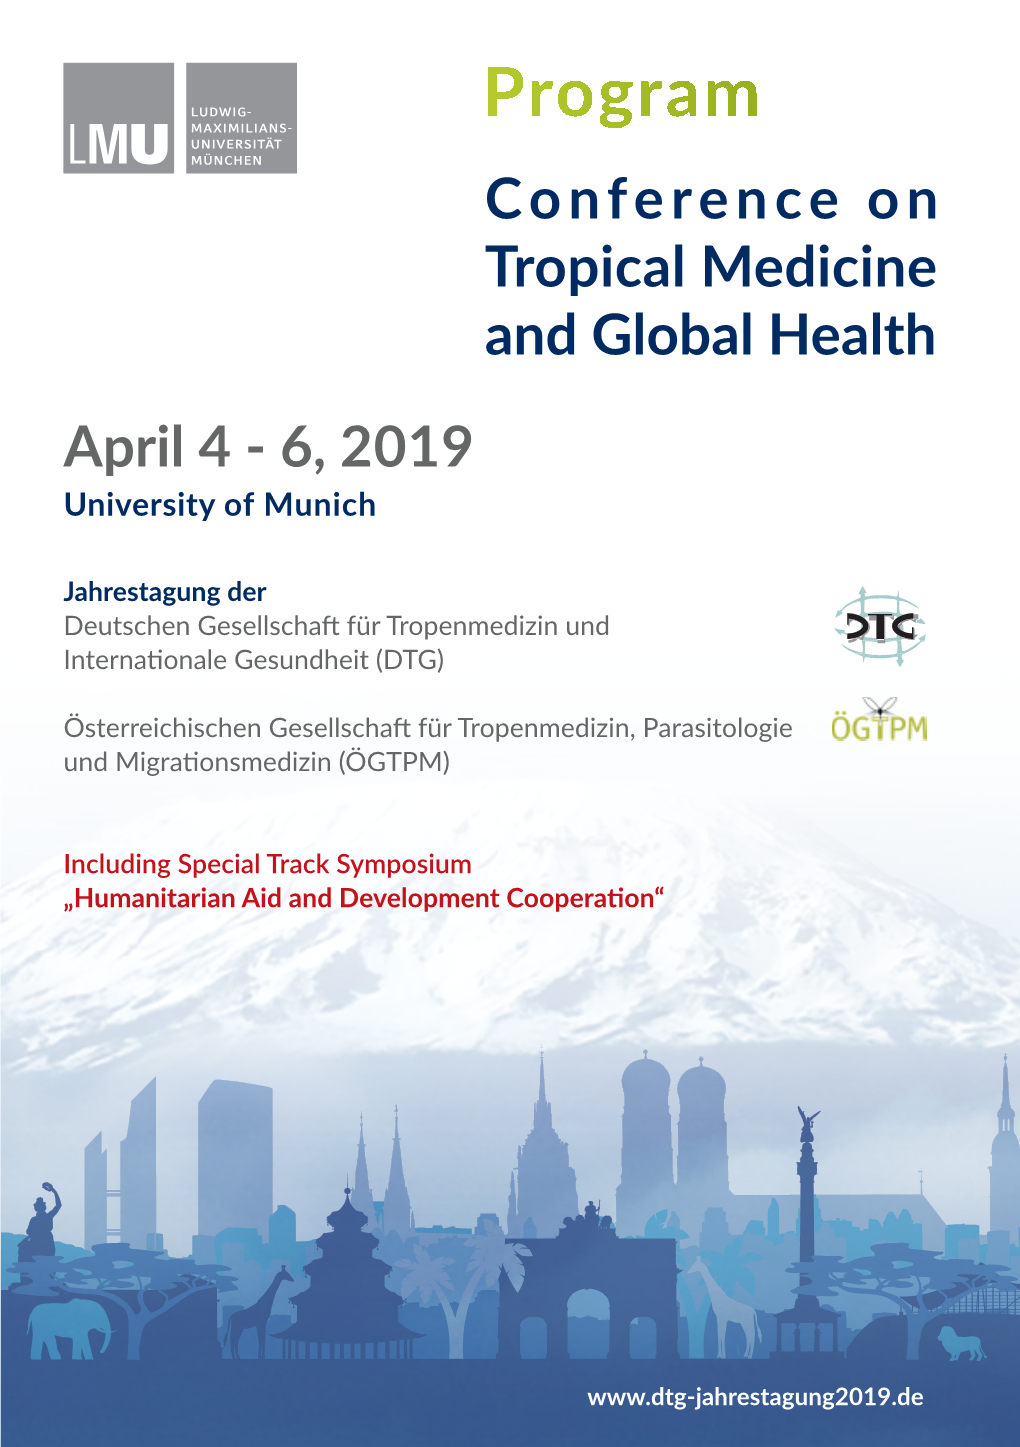 Program Conference on Tropical Medicine and Global Health April 4 - 6, 2019 University of Munich